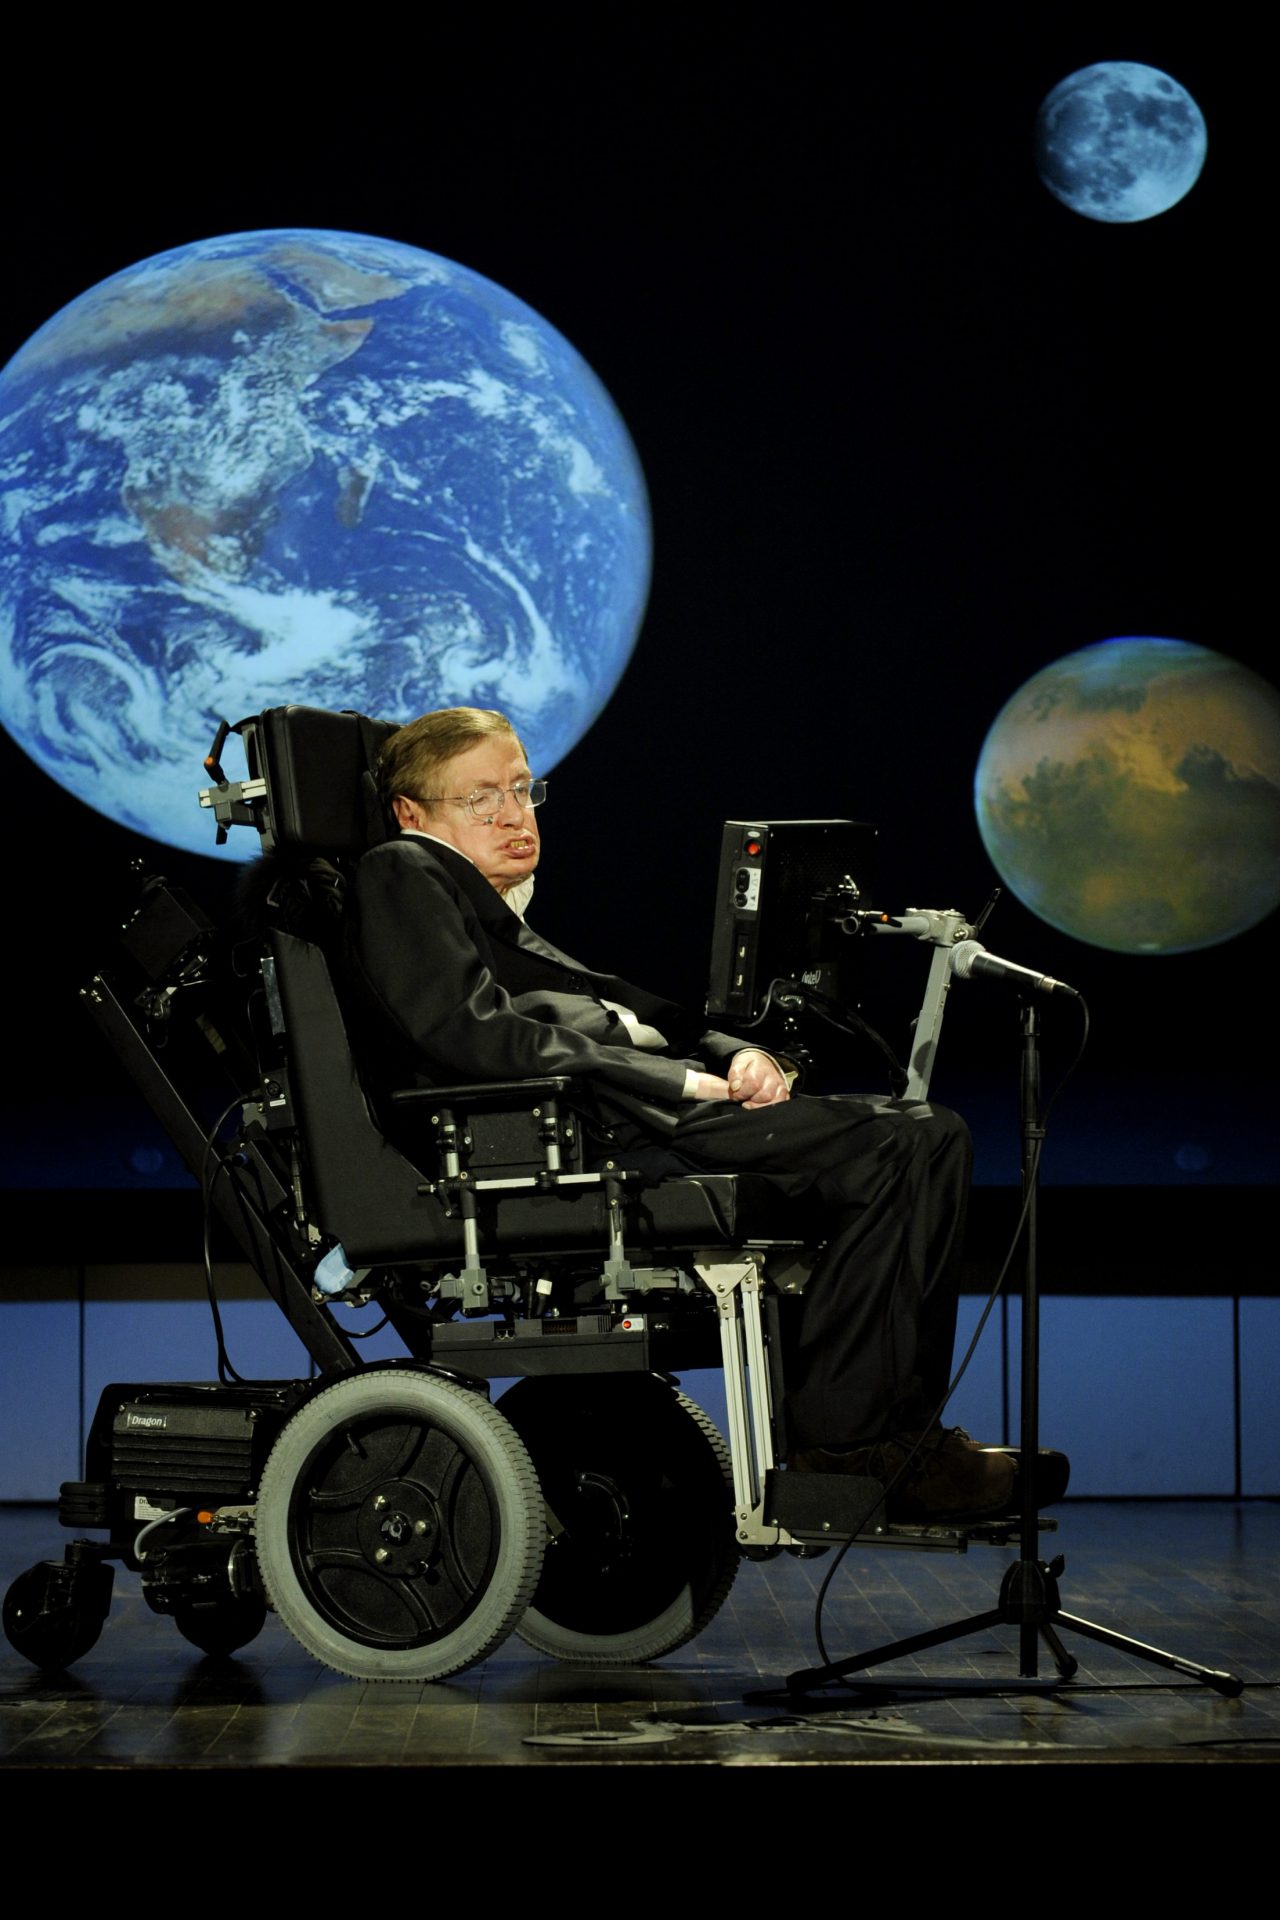 Where the universe begins and ends, according to Stephen Hawking